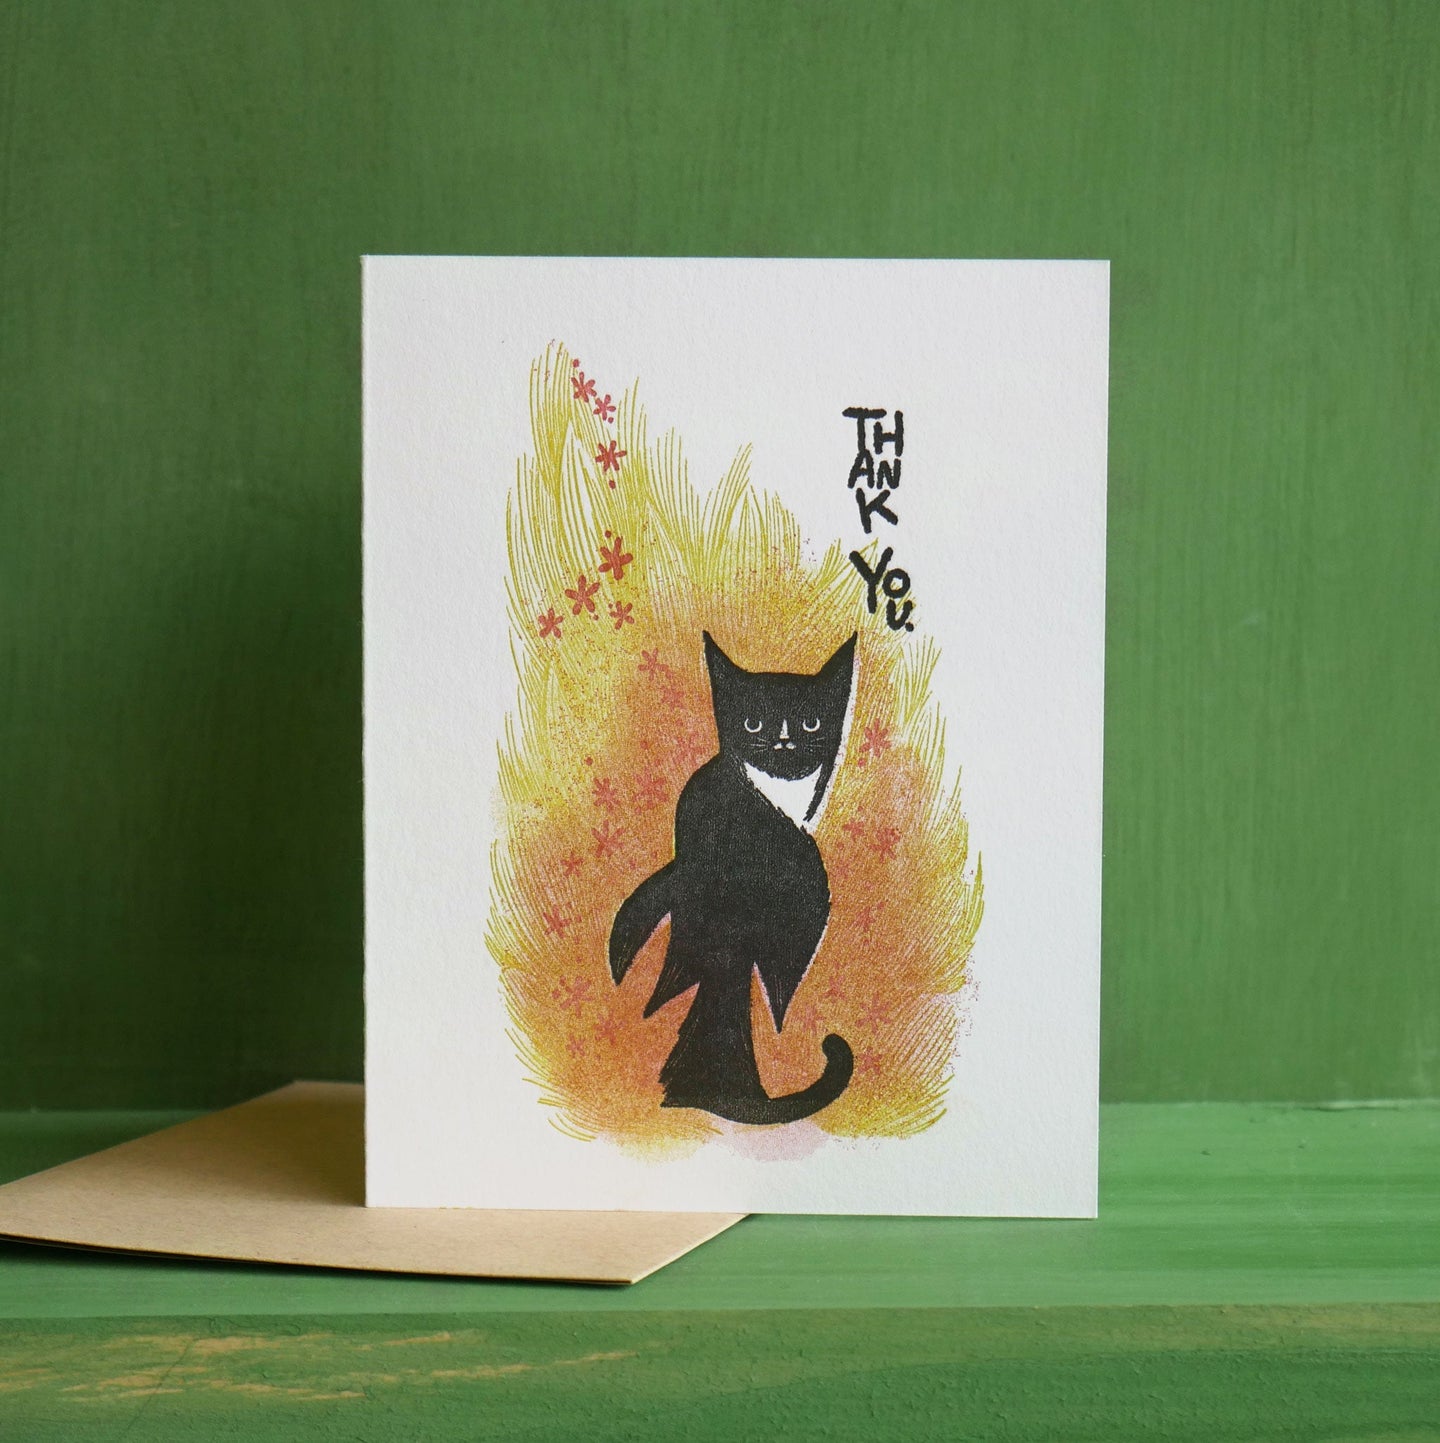 Kitty Cat Thank You Card